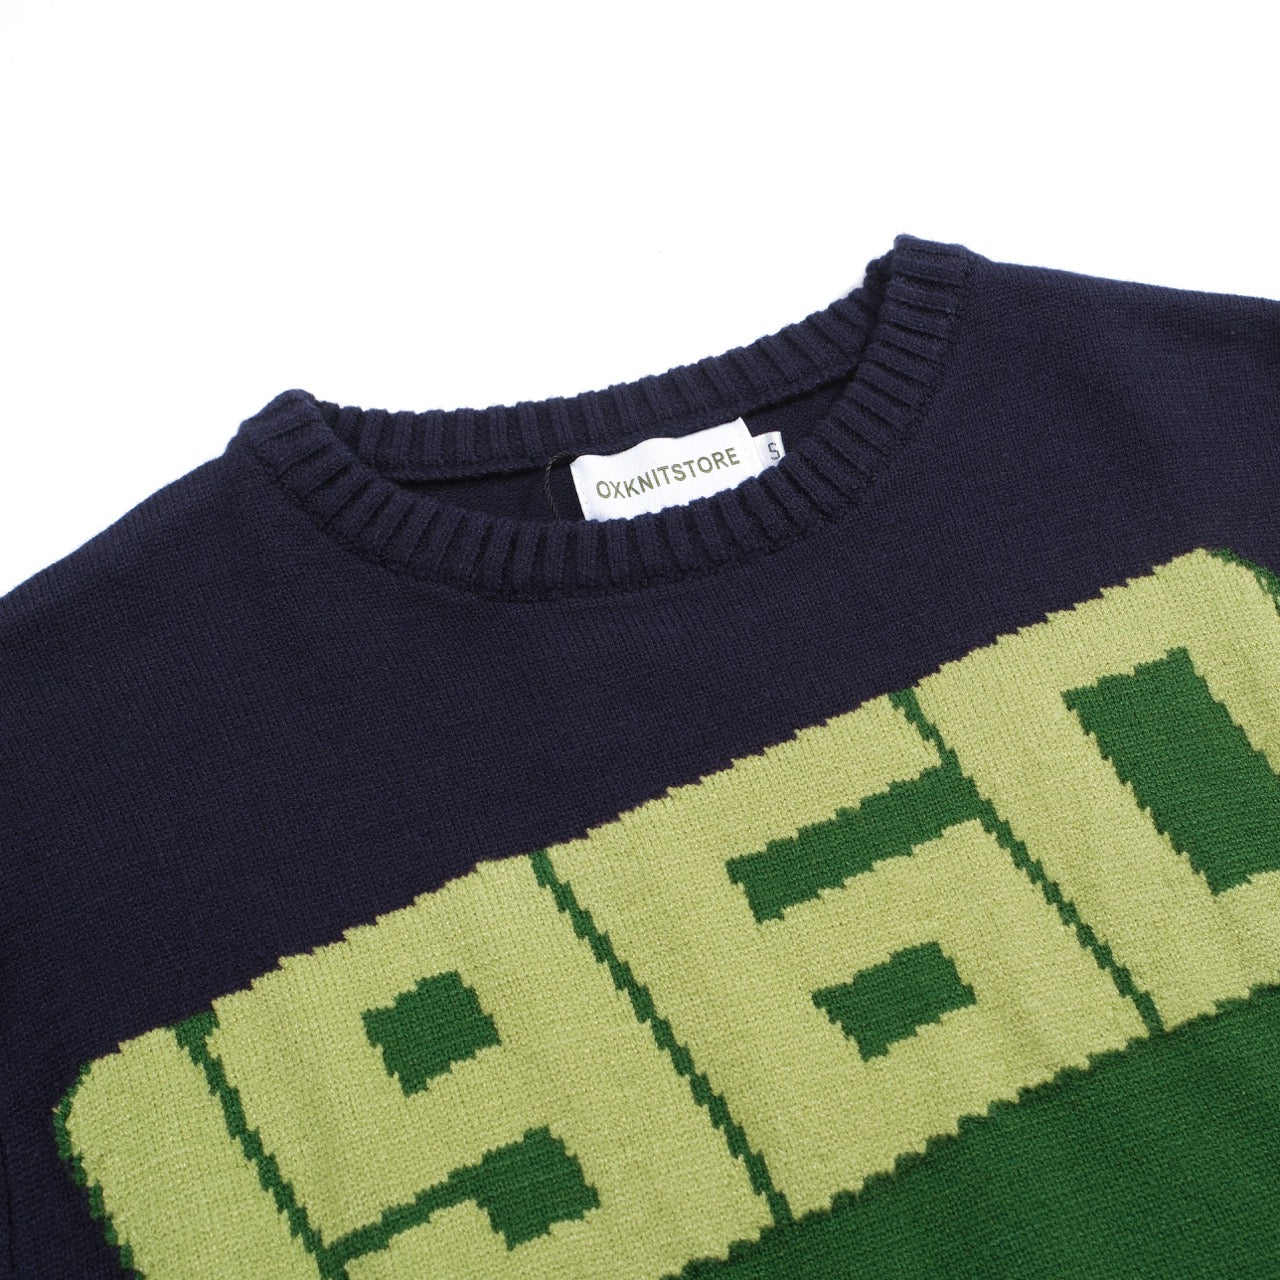 Men's Green 1960 Three-dimensional Characters Knitted Navy Blue Sweater